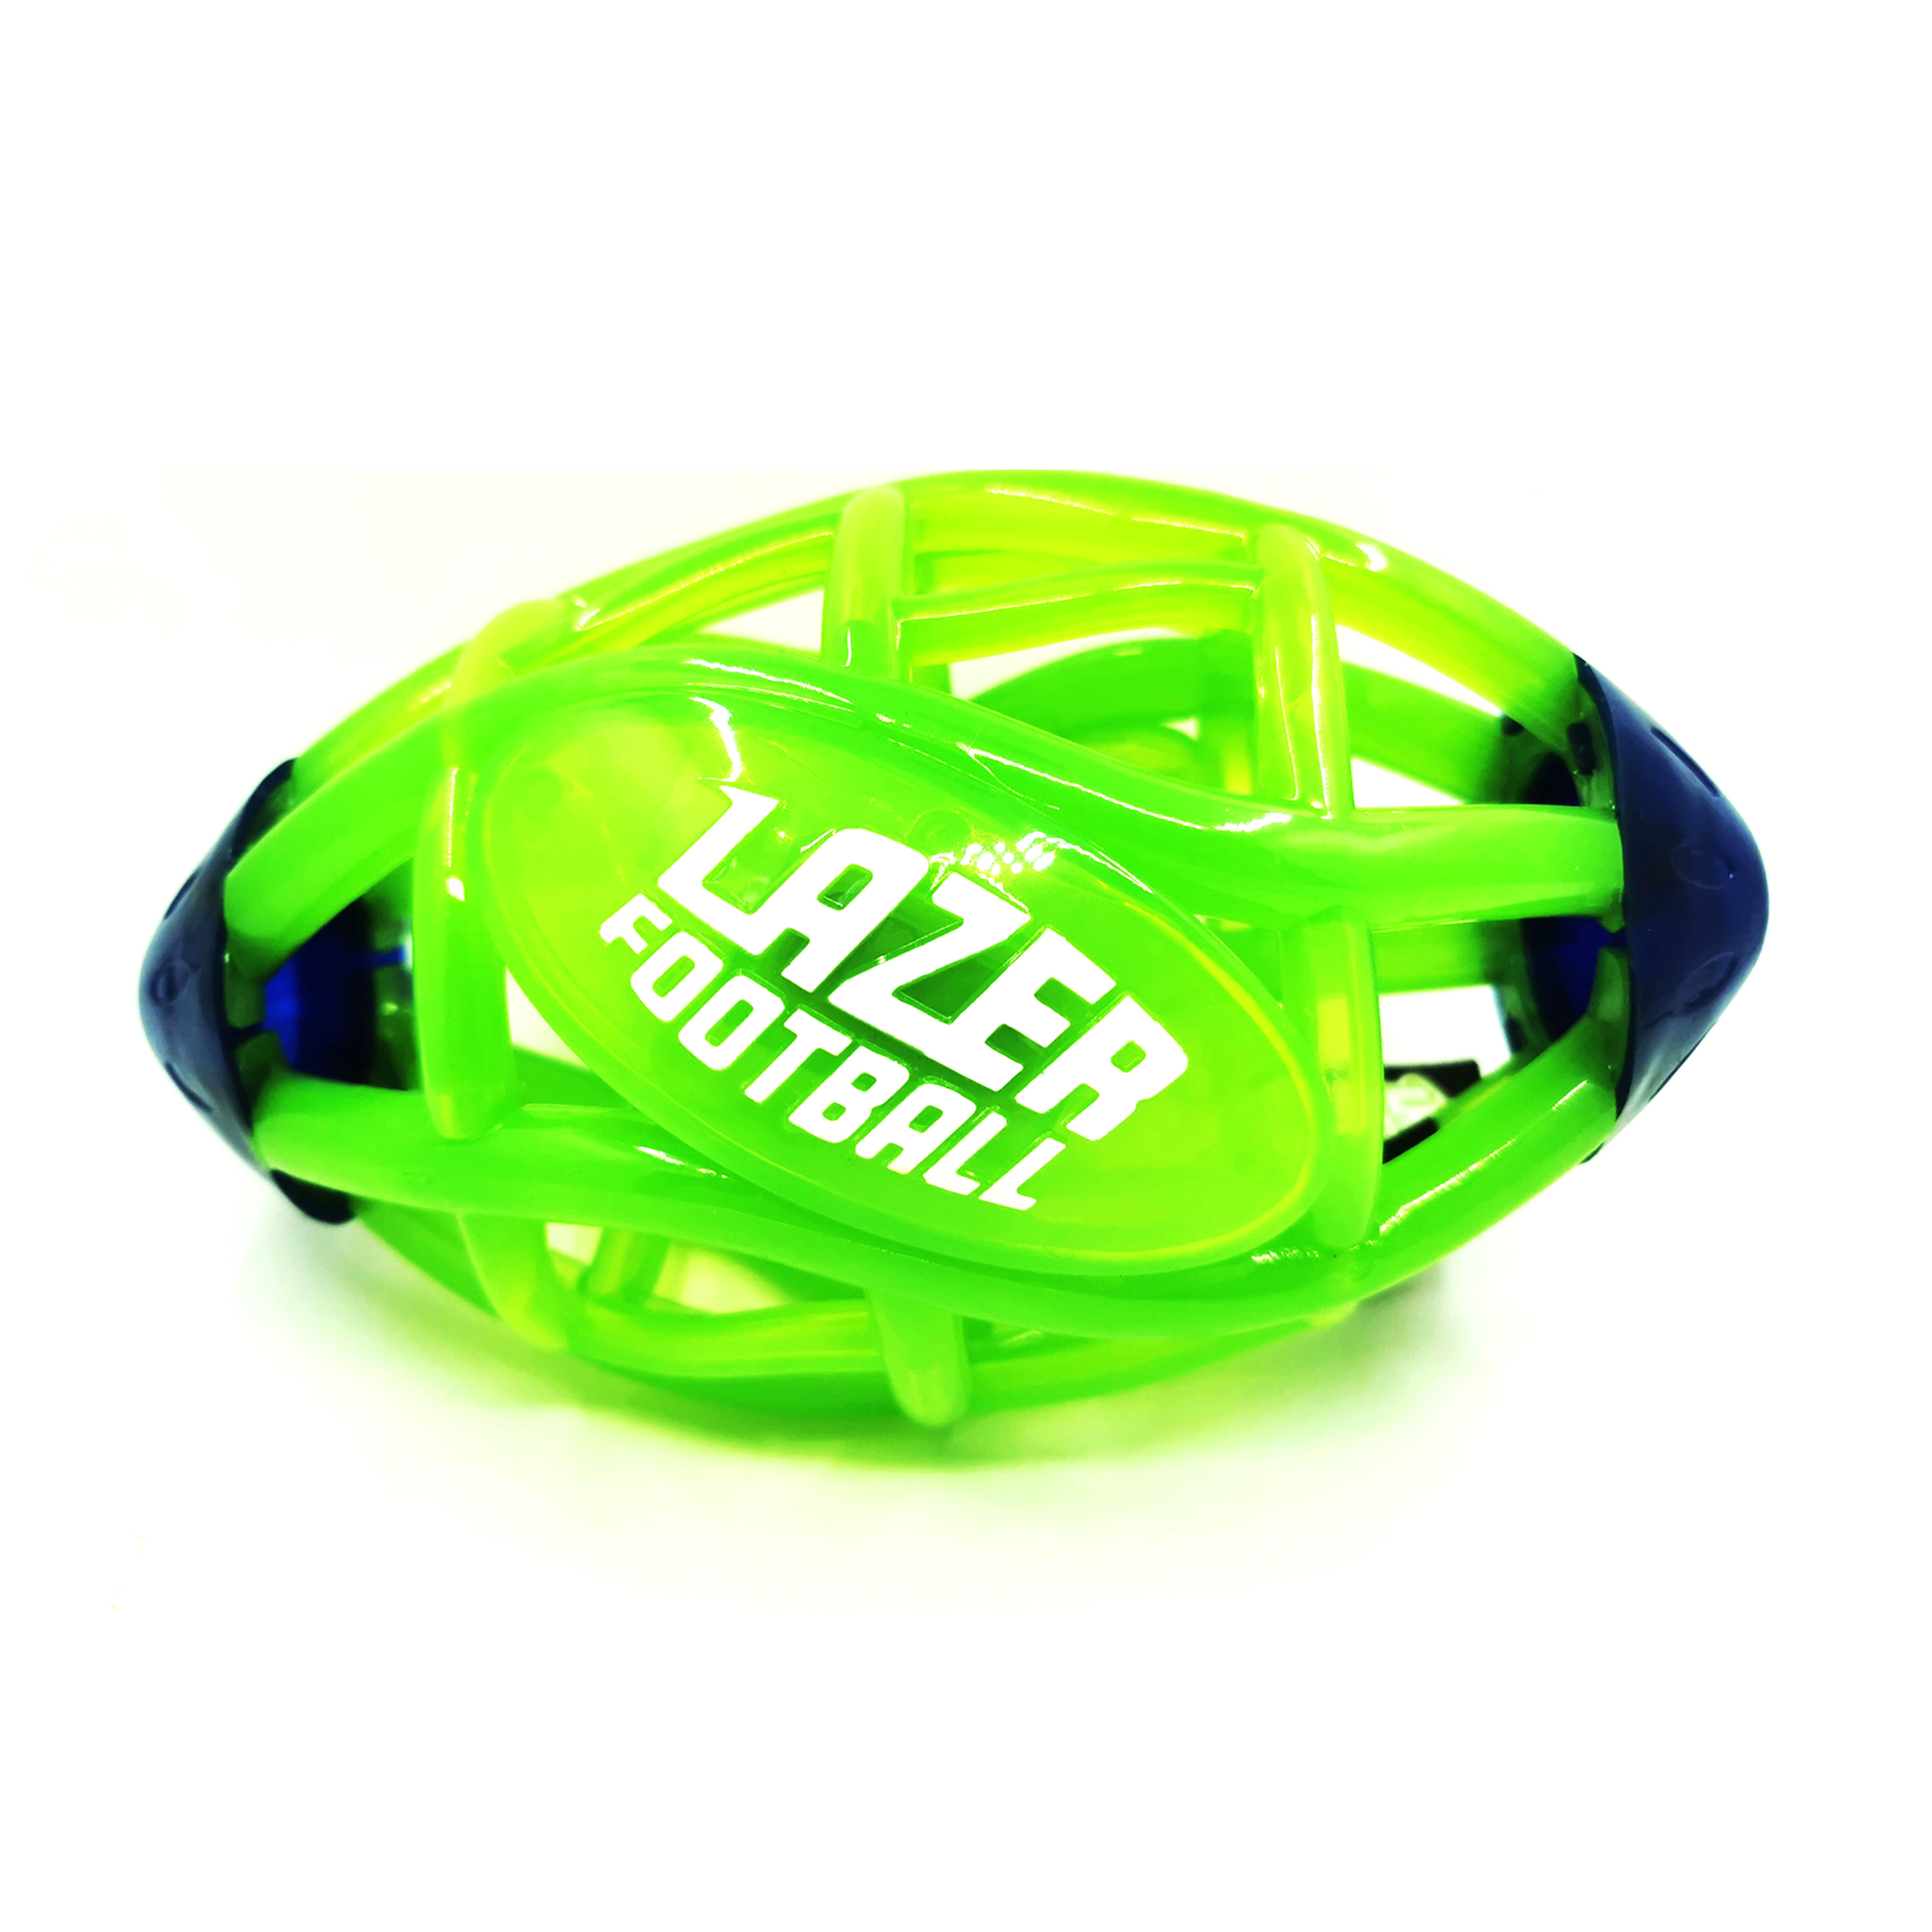 Lazer Light Up Glow Rubber Toy Football, Green and Blue, Pee Wee Size 3 - image 4 of 5